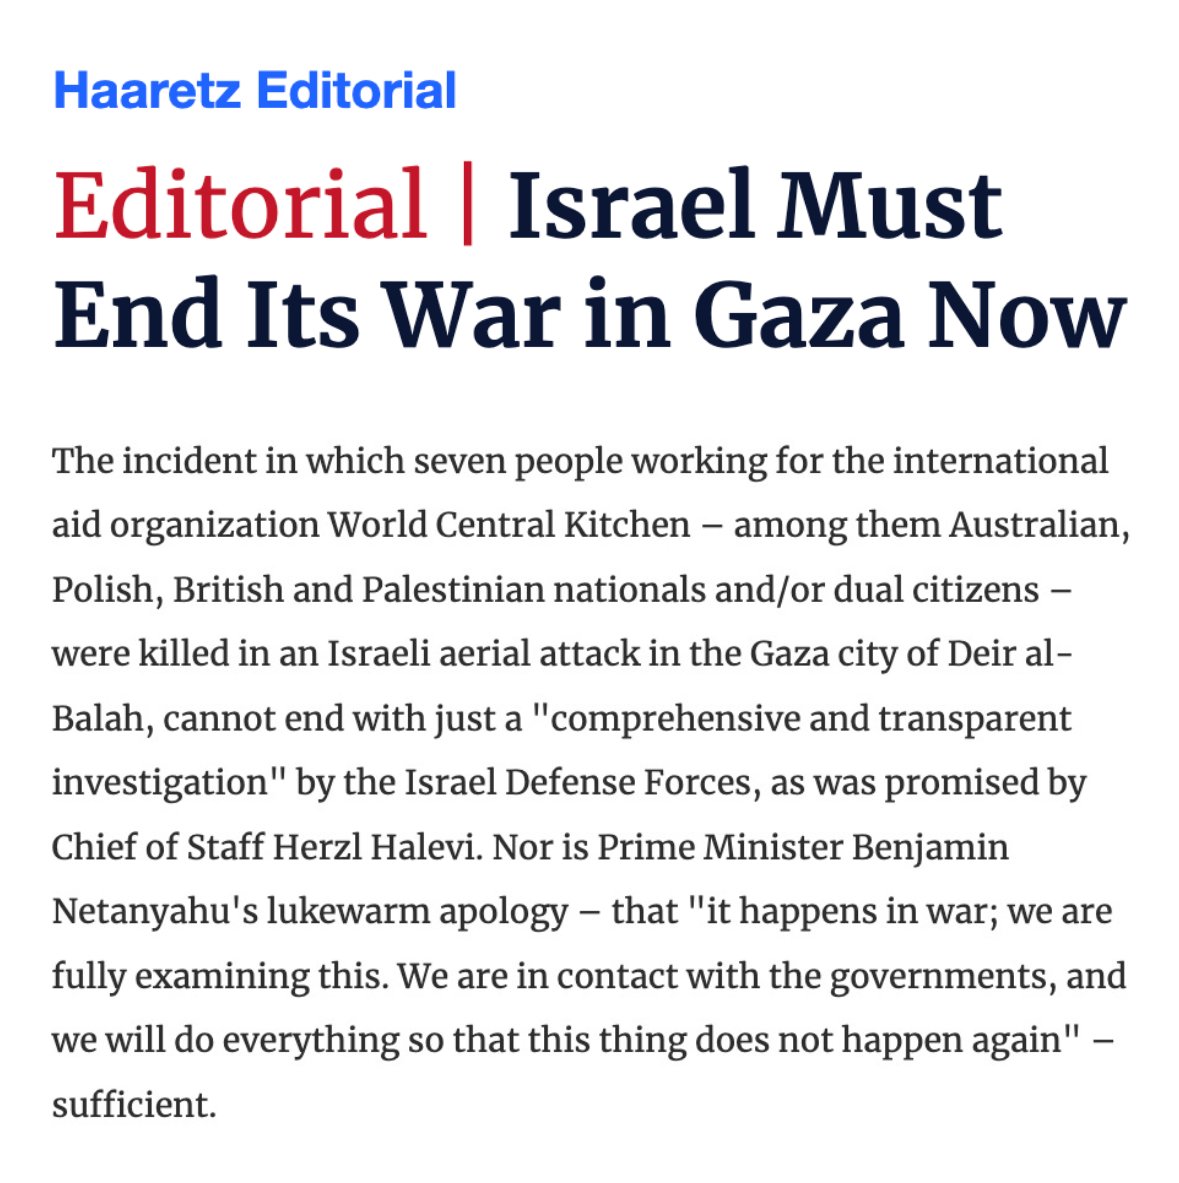 Editorial board of Israeli newspaper Haaretz ties Israel's killing of 7 World Central Kitchen aid workers to the broader 'ease with which the IDF kills Palestinians in Gaza,' like in reported 'kill zones.' Says Israel must end the war now.